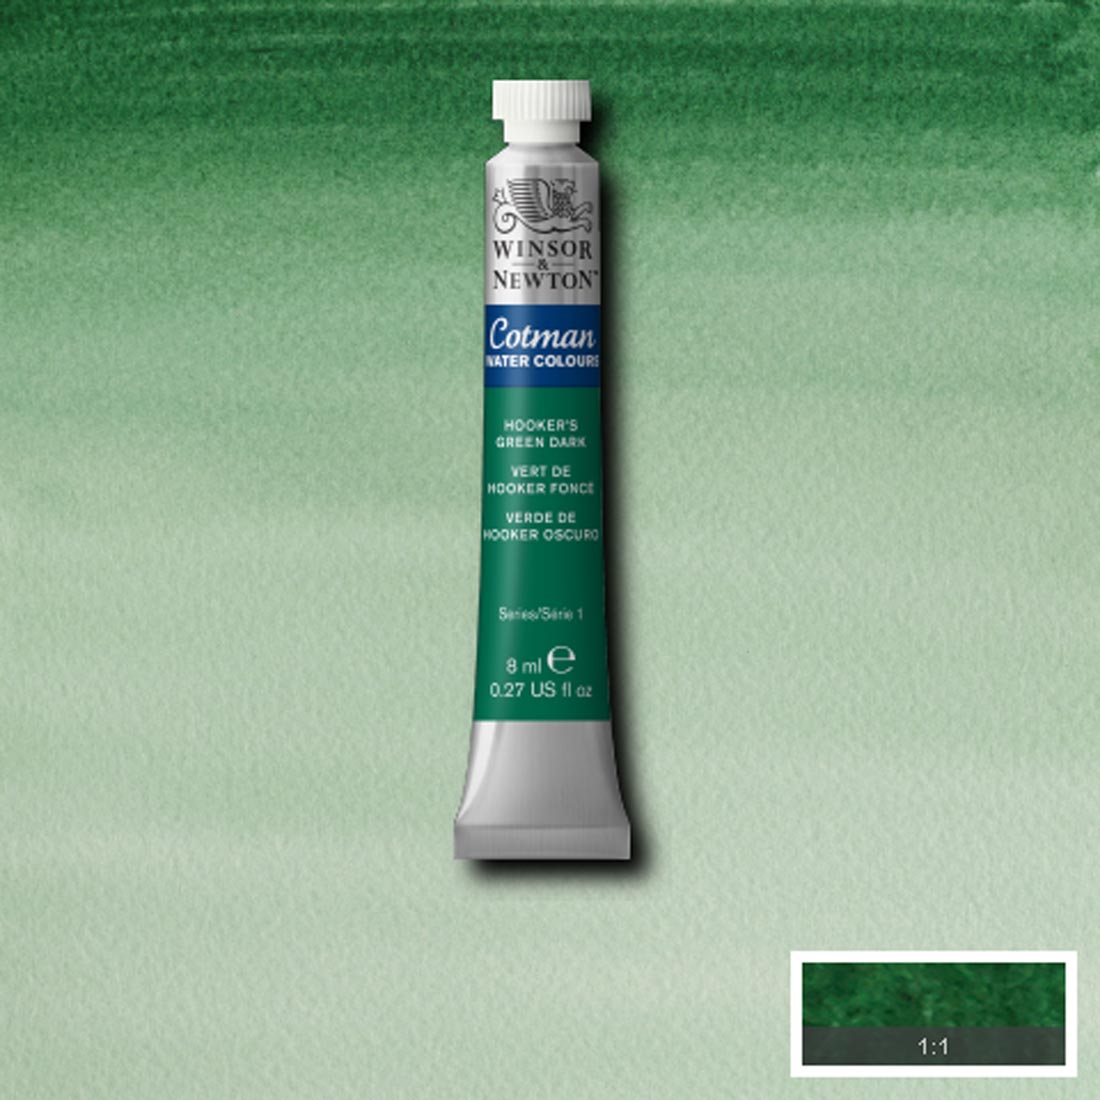 Tube of Hooker's Green Dark Winsor and Newton Cotman Water Colour with a paint swatch for the background